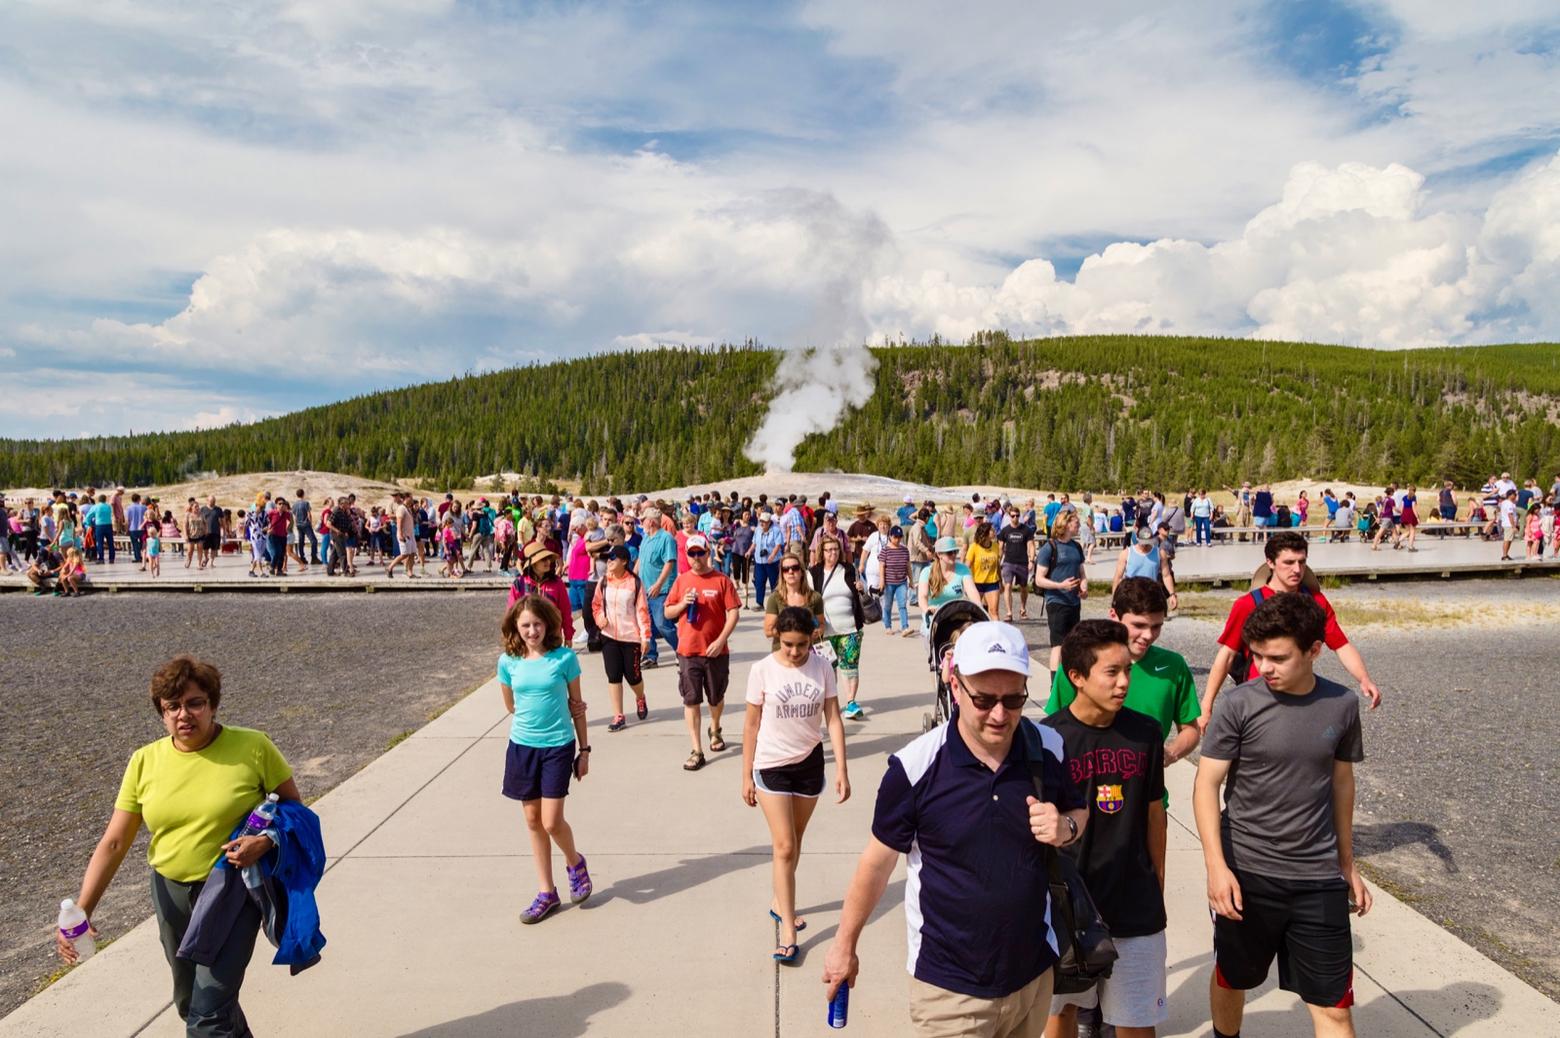 Summer visitors to Yellowstone depart after watching Old Faithful erupt for a few minutes. We all passionately love Yellowstone; it's a fact. But does our experience seeing the world's most famous geyser erupt change how we think about nature?  A human-built industrial infrastructure encircles the geyser itself and the physical human footprint dwarfs it in size. How is this a metaphor for the kinds of things Popkin addresses in his new book? Photo courtesy Jacob W. Frank/NPS 